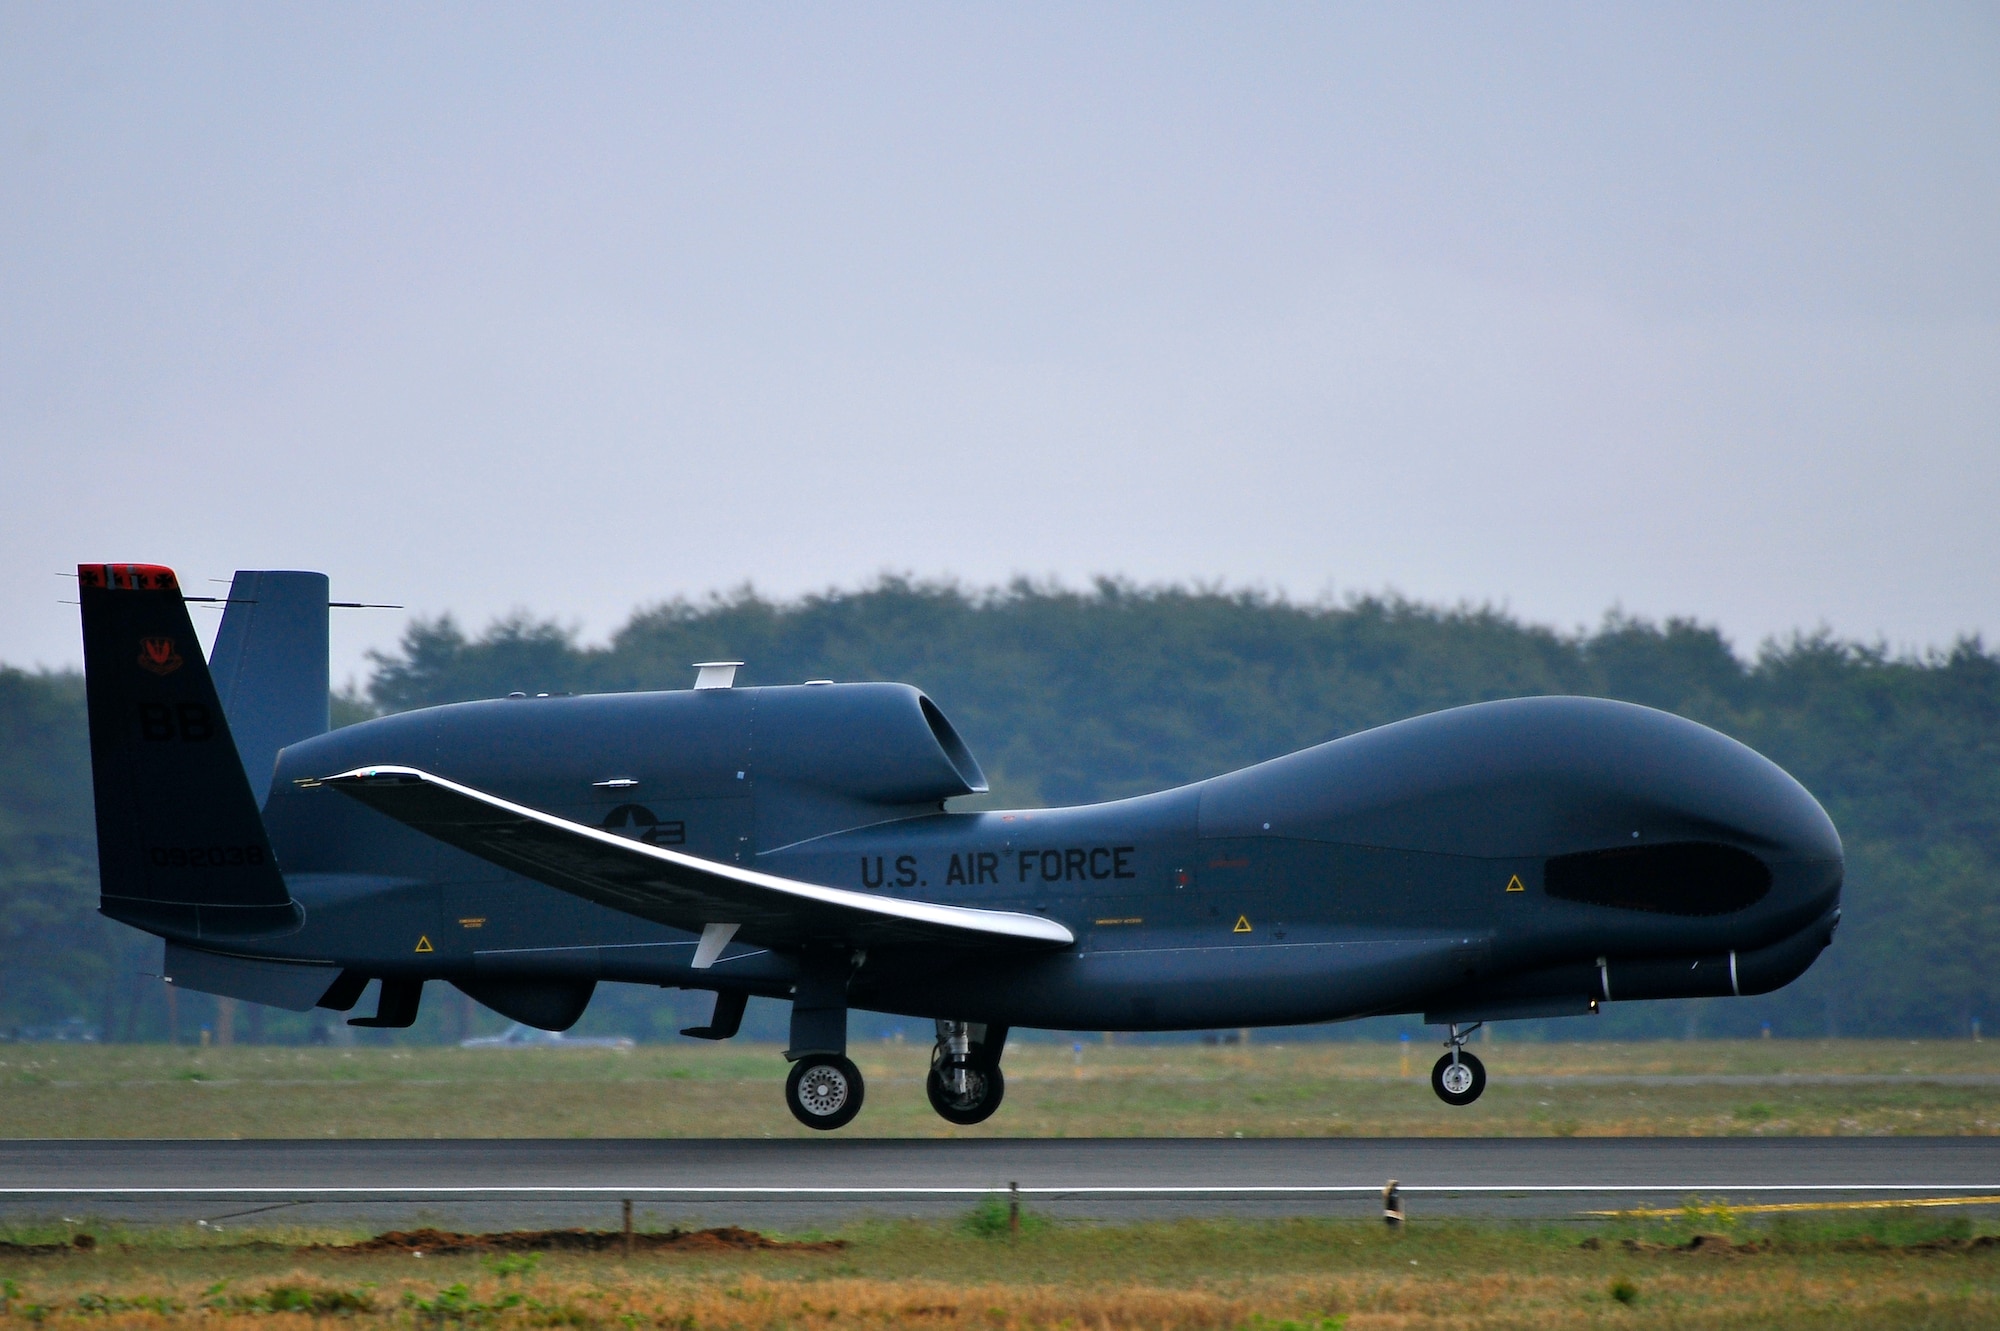 An RQ-4 Global Hawk from Andersen Air Force Base, Guam lands at Misawa Air Base, Japan, May 24, 2014. The remotely piloted system supports U.S. intelligence, surveillance, and reconnaissance missions and contingency operations throughout the Pacific theater. The Global Hawk will be temporarily assigned to Misawa AB until October. (U.S. Air Force photo/Staff Sgt. Nathan Lipscomb)